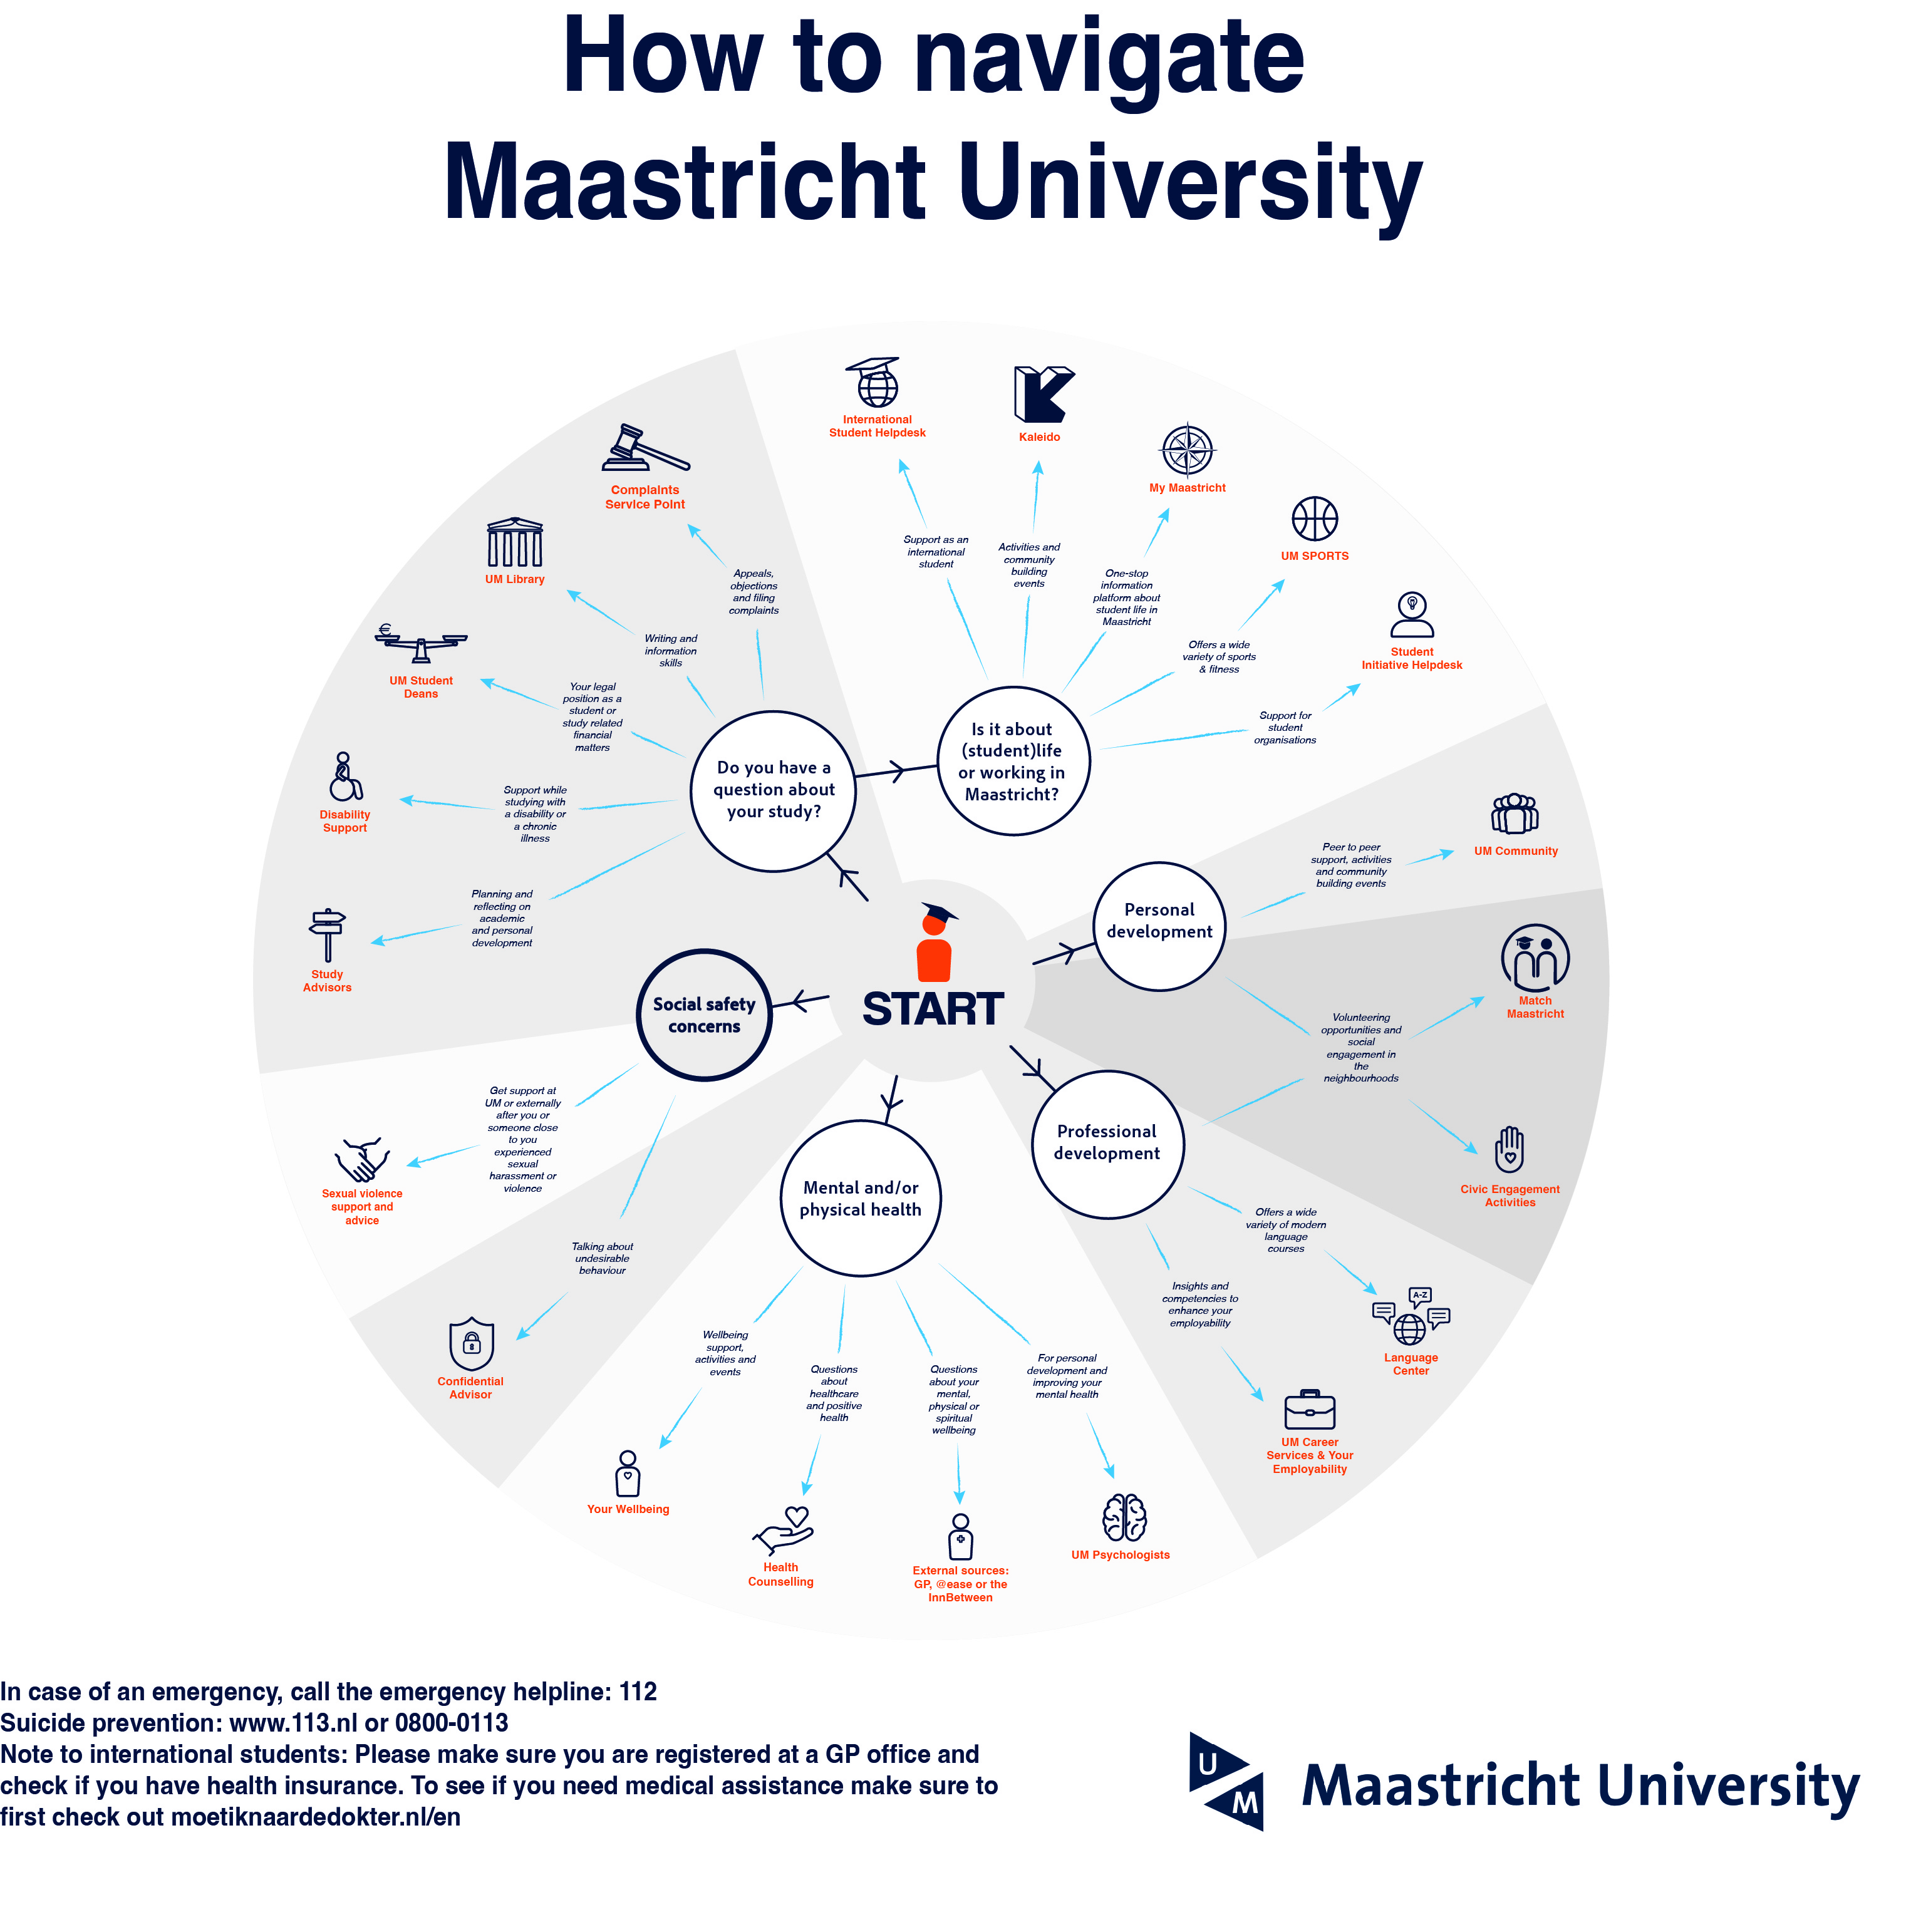 How to Navigate the University